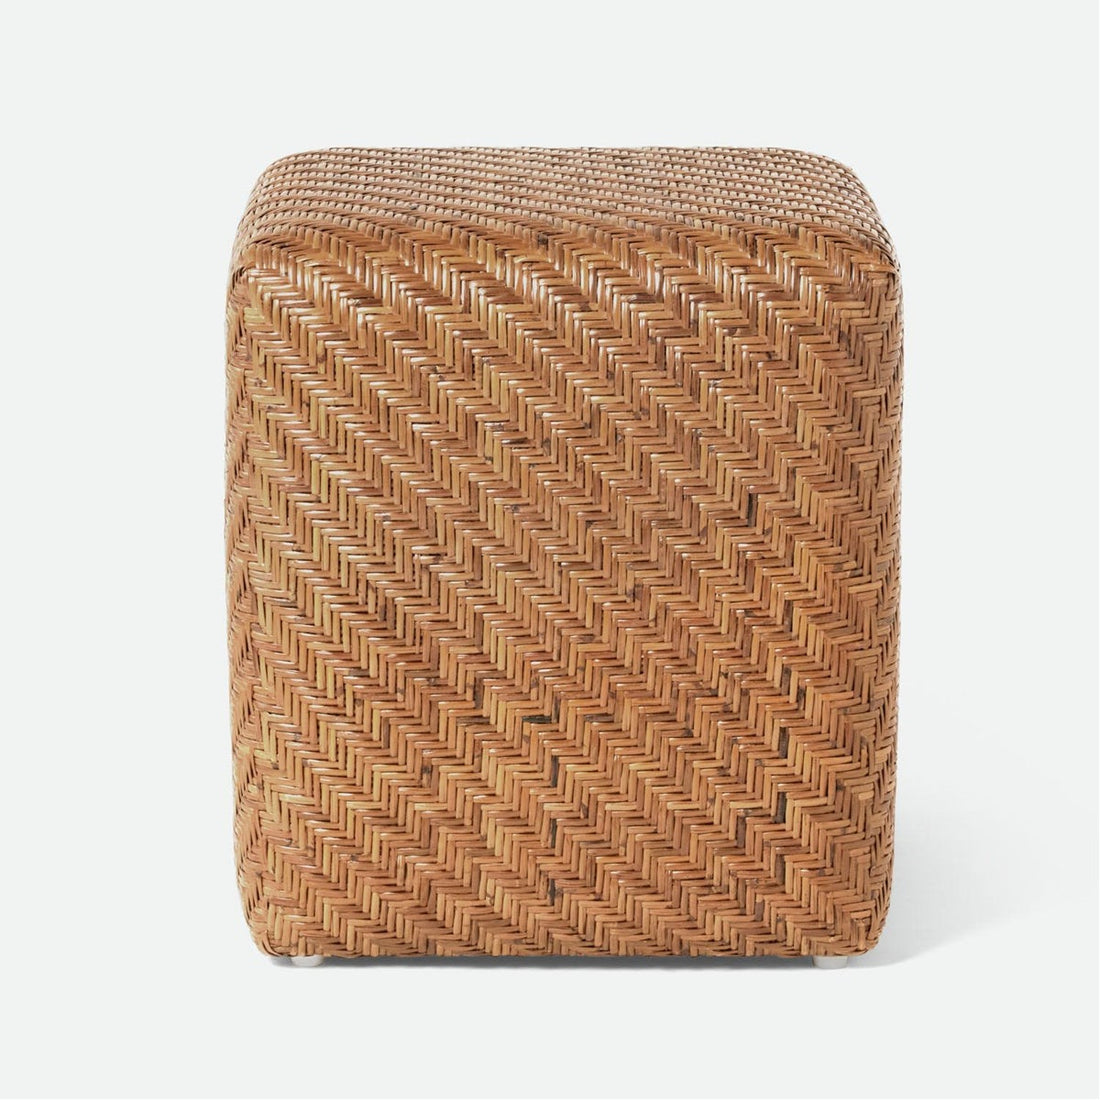 Made Goods Gypsy Square Rattan Stool